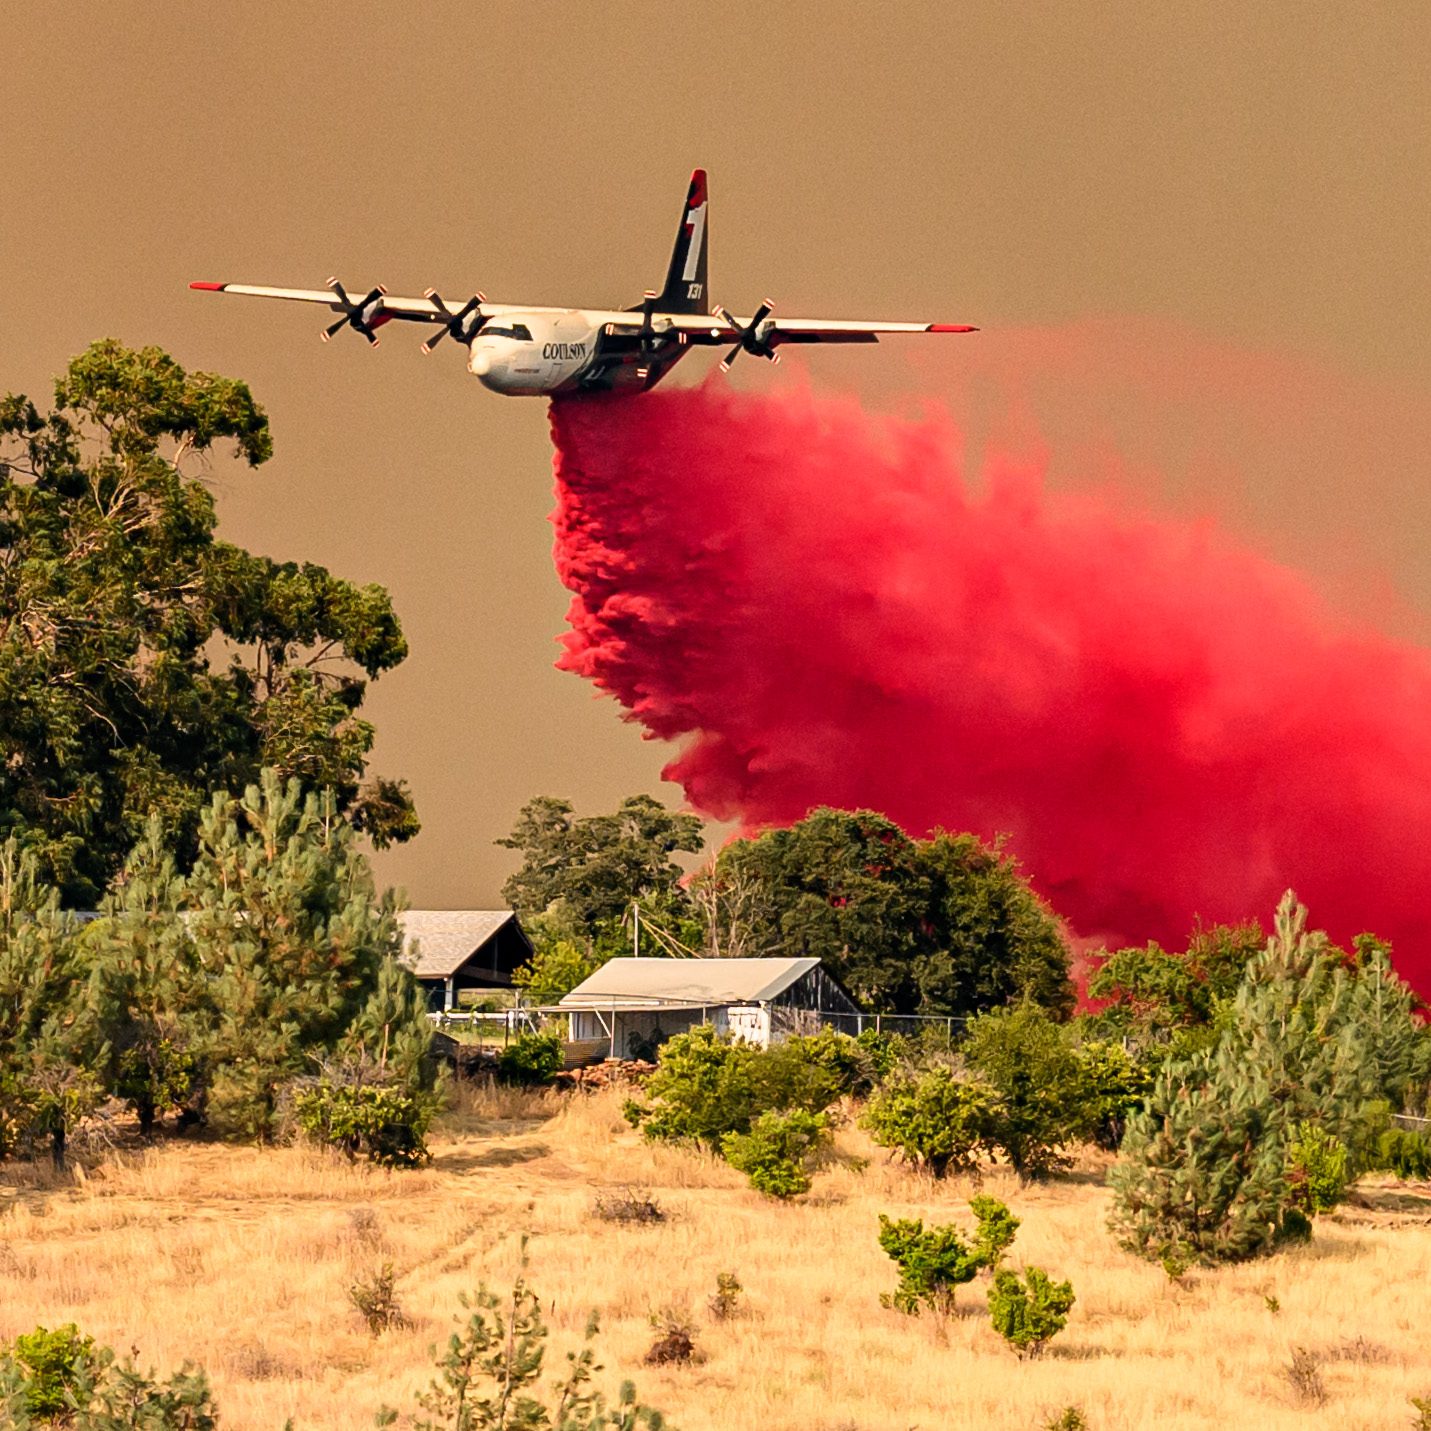 An airplane drops a large amount of red fire retardant over a wooded area with some houses, likely to combat a nearby wildfire.